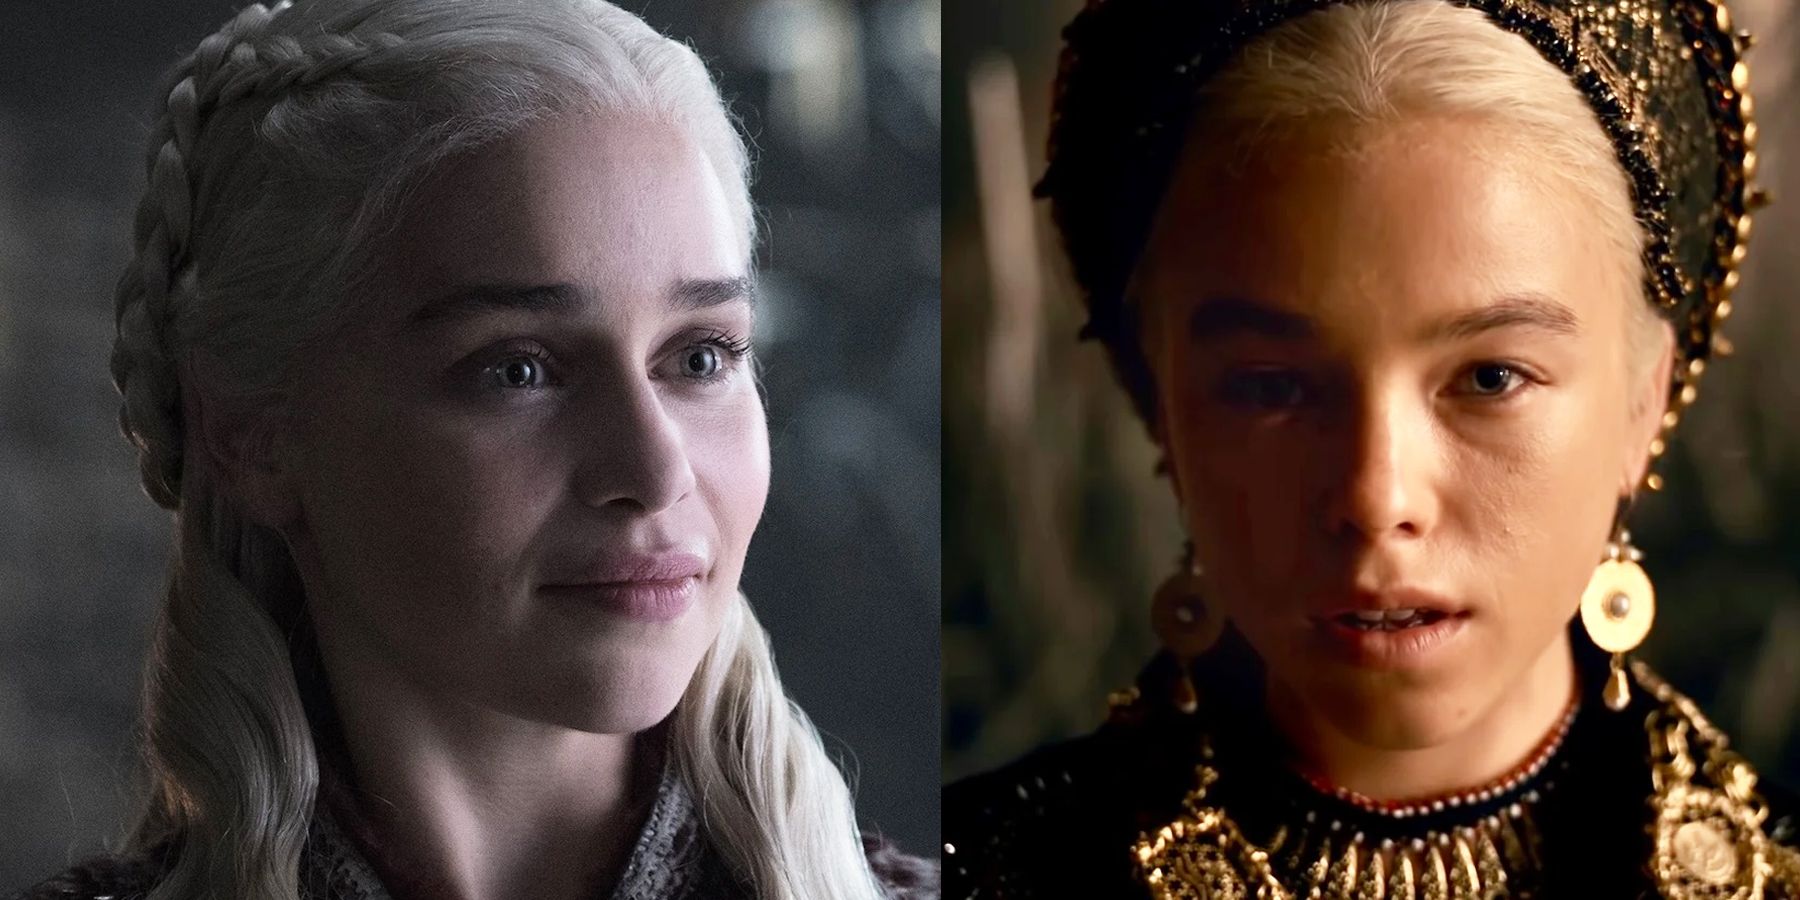 Daenerys and Rhaenyra Targaryen in Game of Thrones and House of the Dragon.